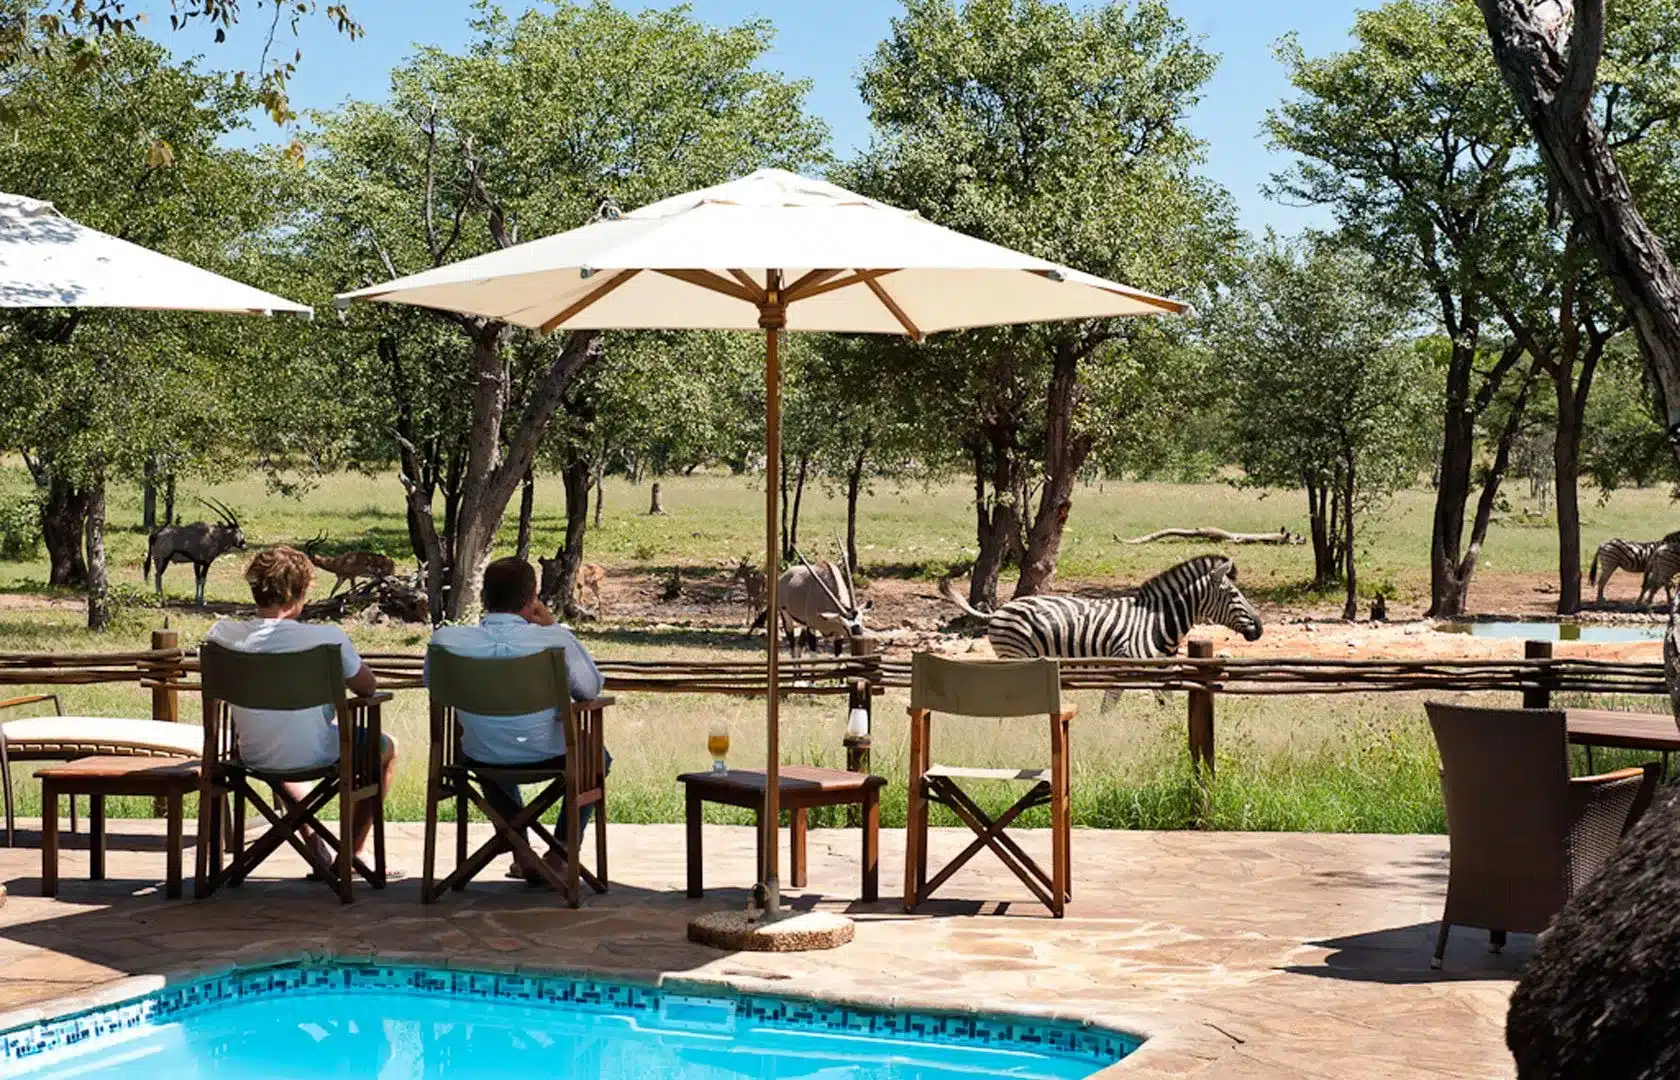 46 Ongava Tented Camp